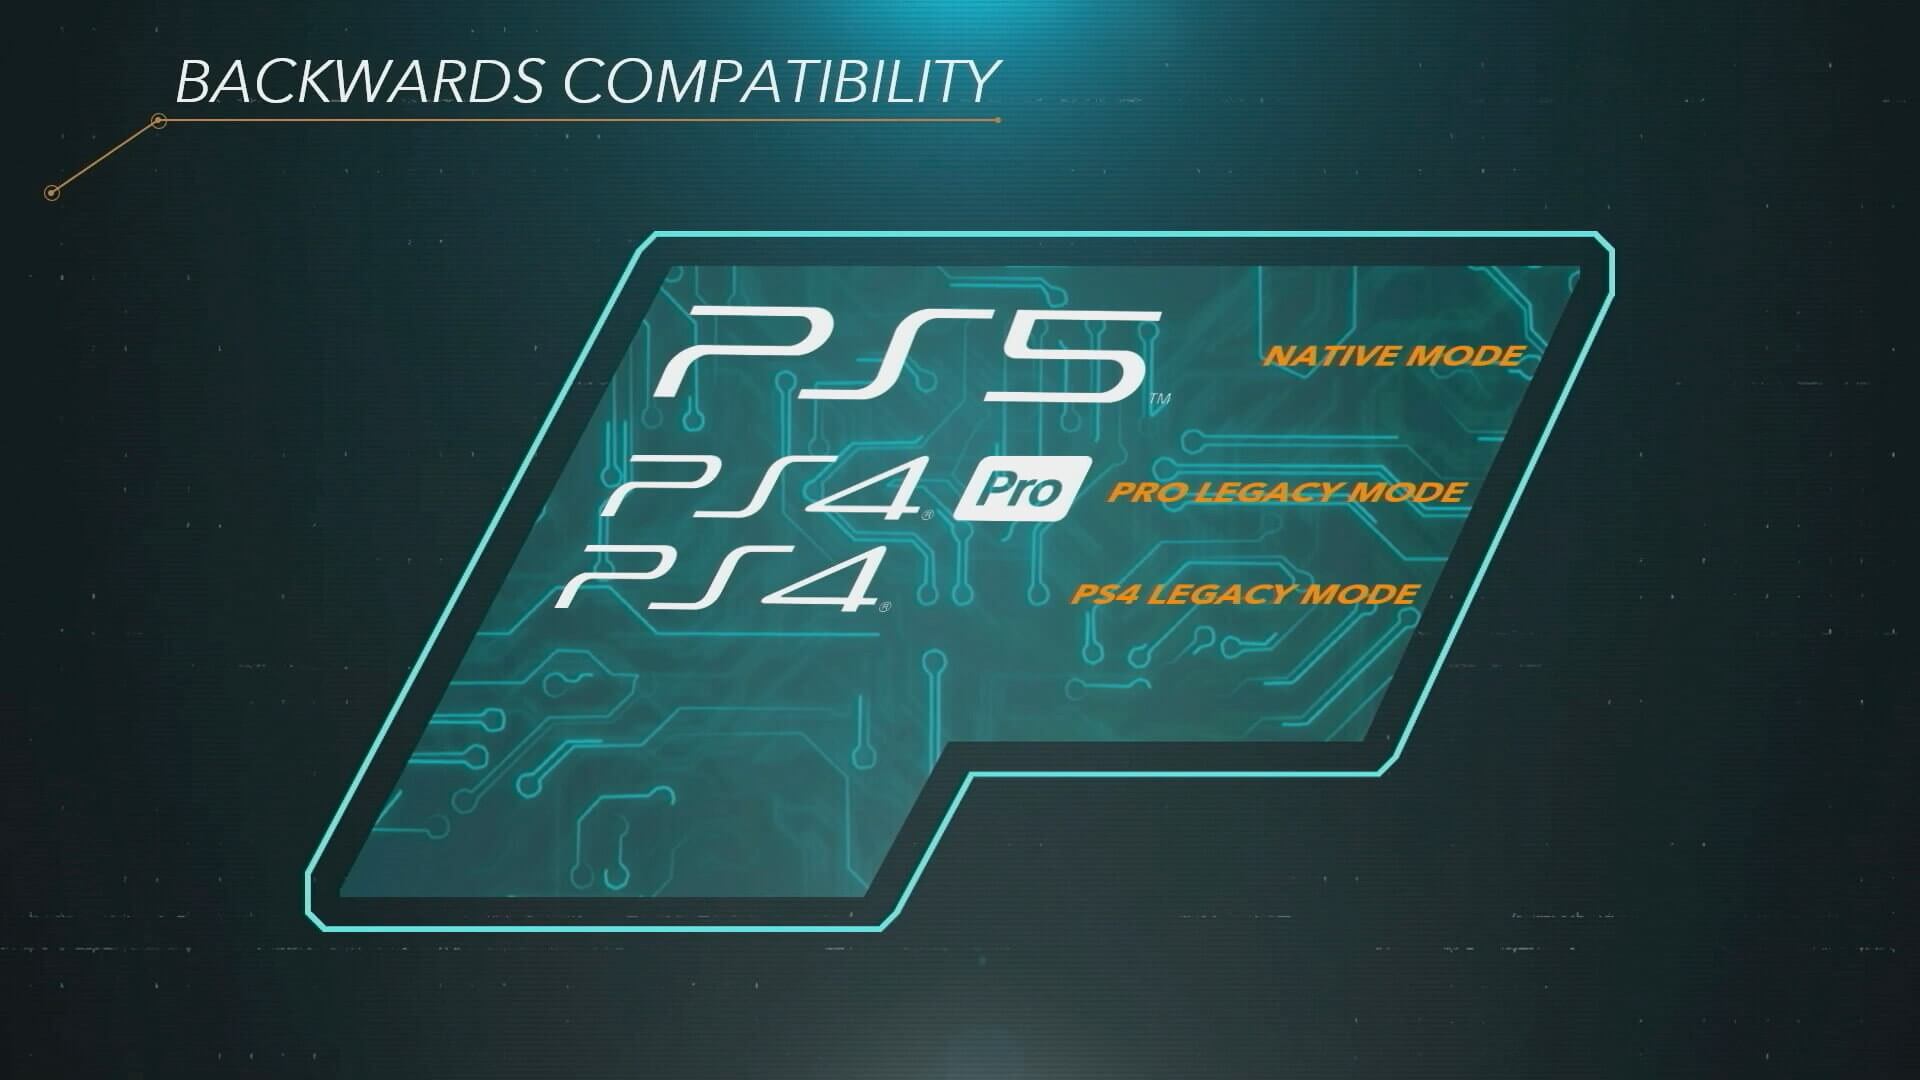 PlayStation 5 backwards compatibility: Support for some, but not all PS4 games